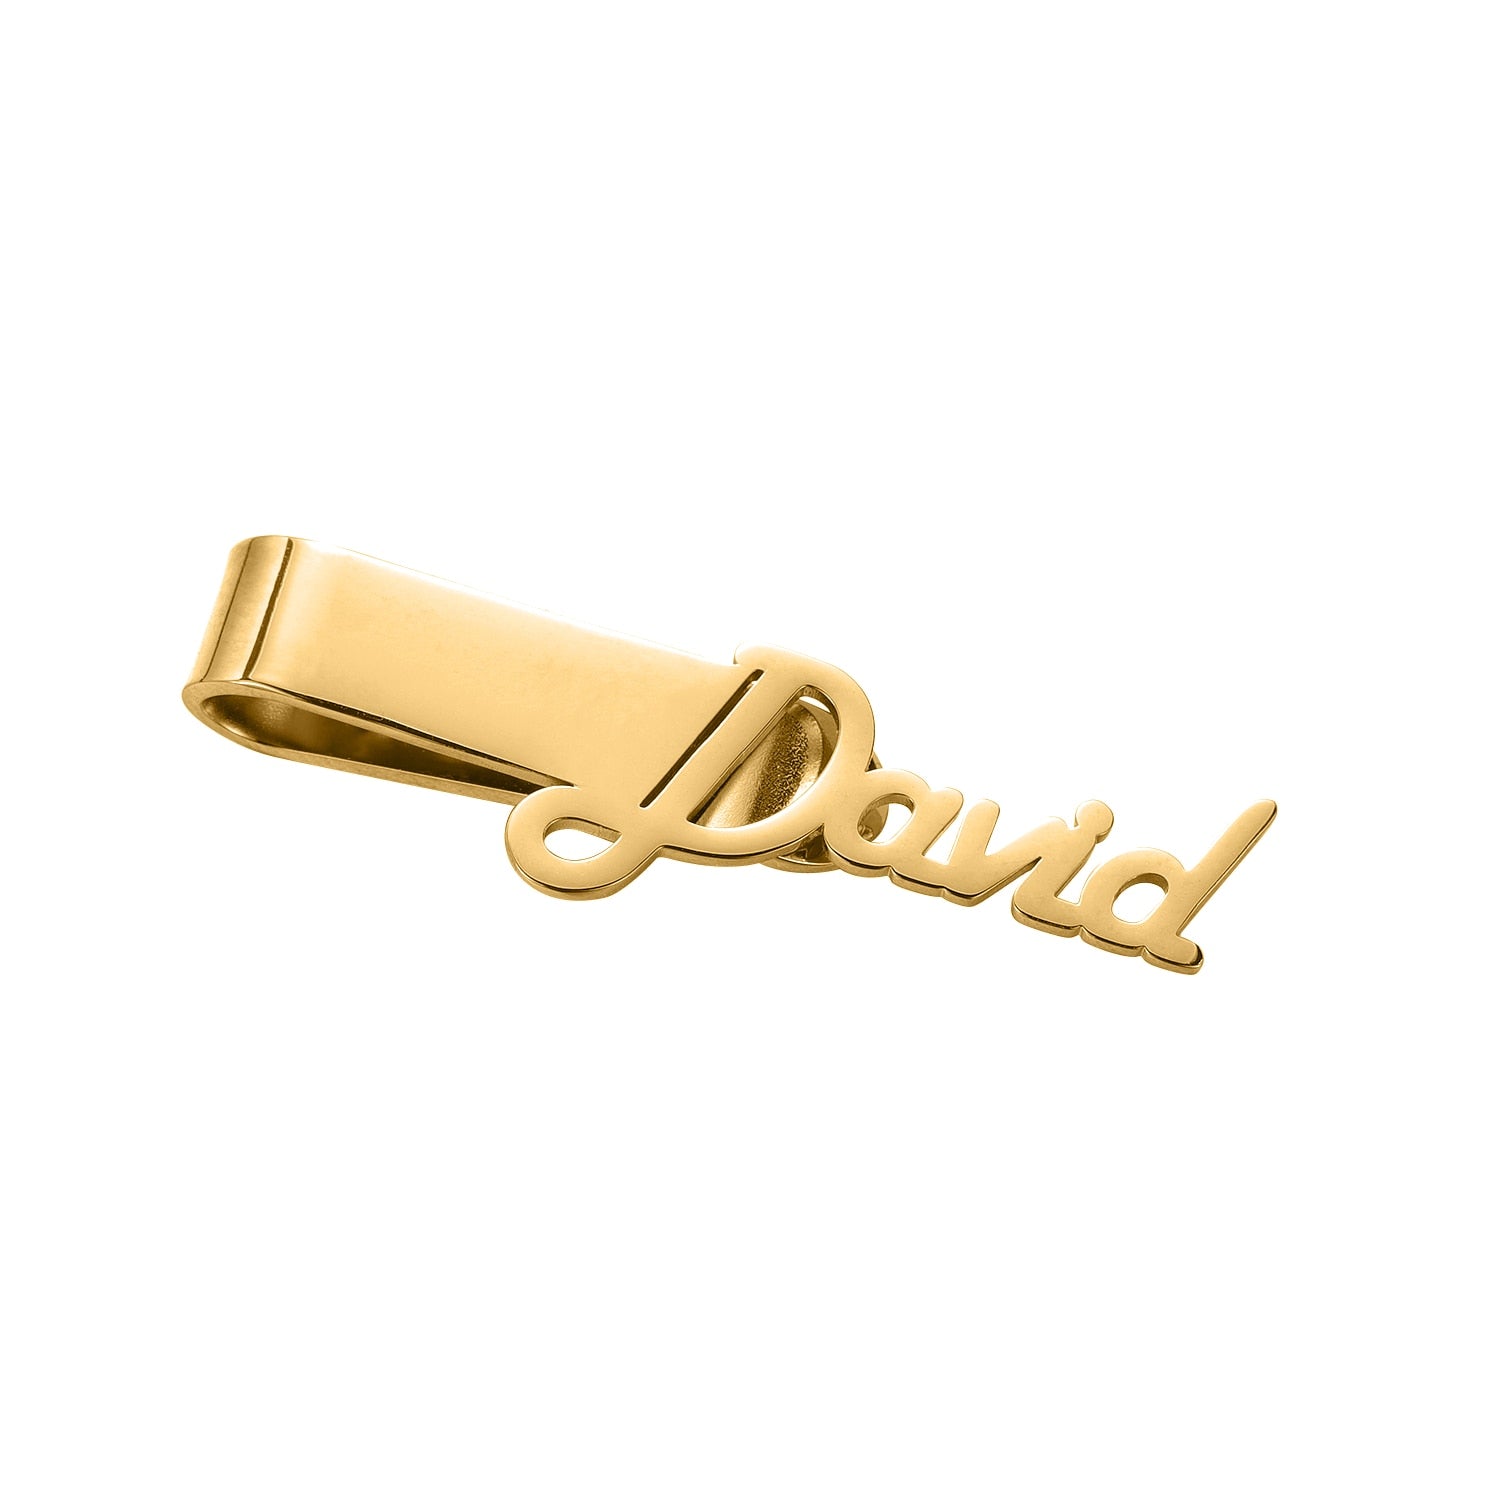 Personalised Name Tie Clip for Men